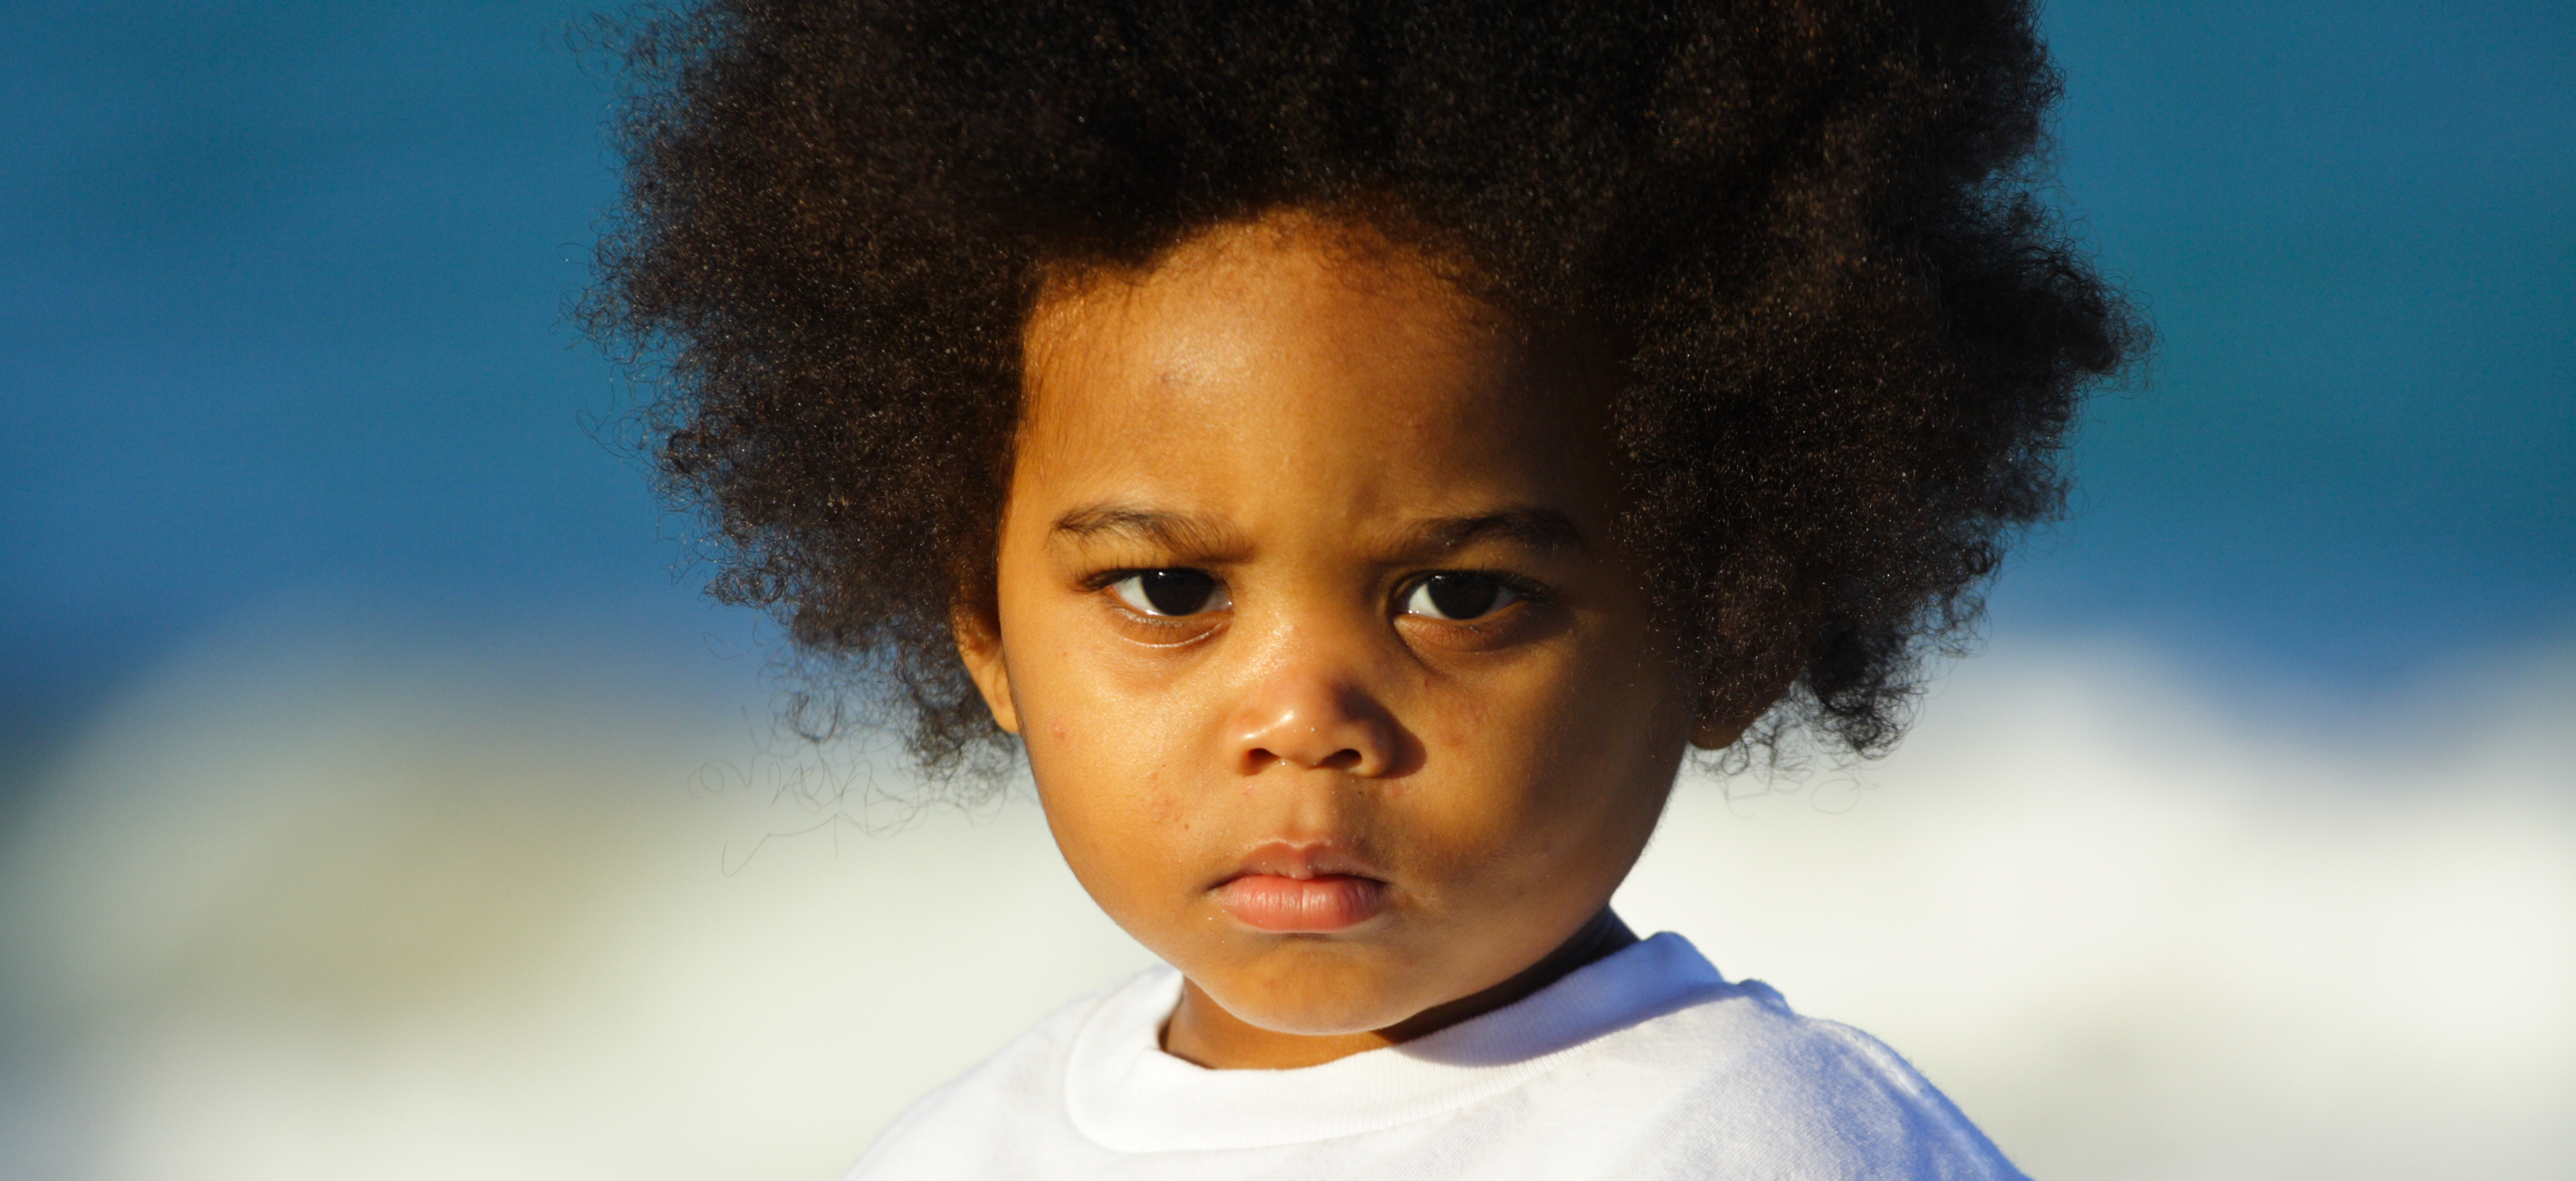 Young child with an afro hairstyle